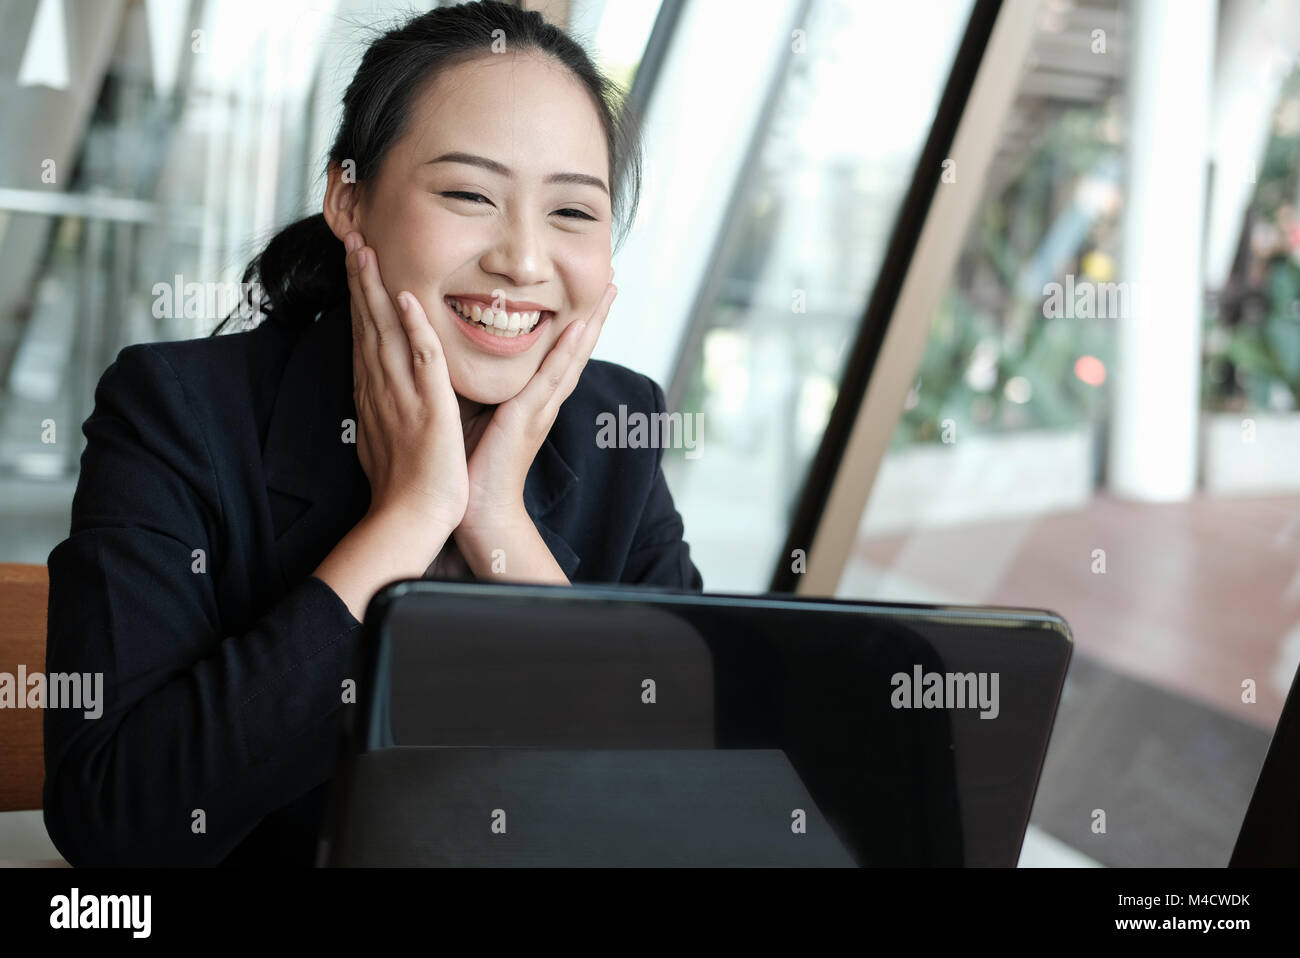 businesswoman put hand on face with happiness for successful project. cheerful woman showing gladness for achievement Stock Photo